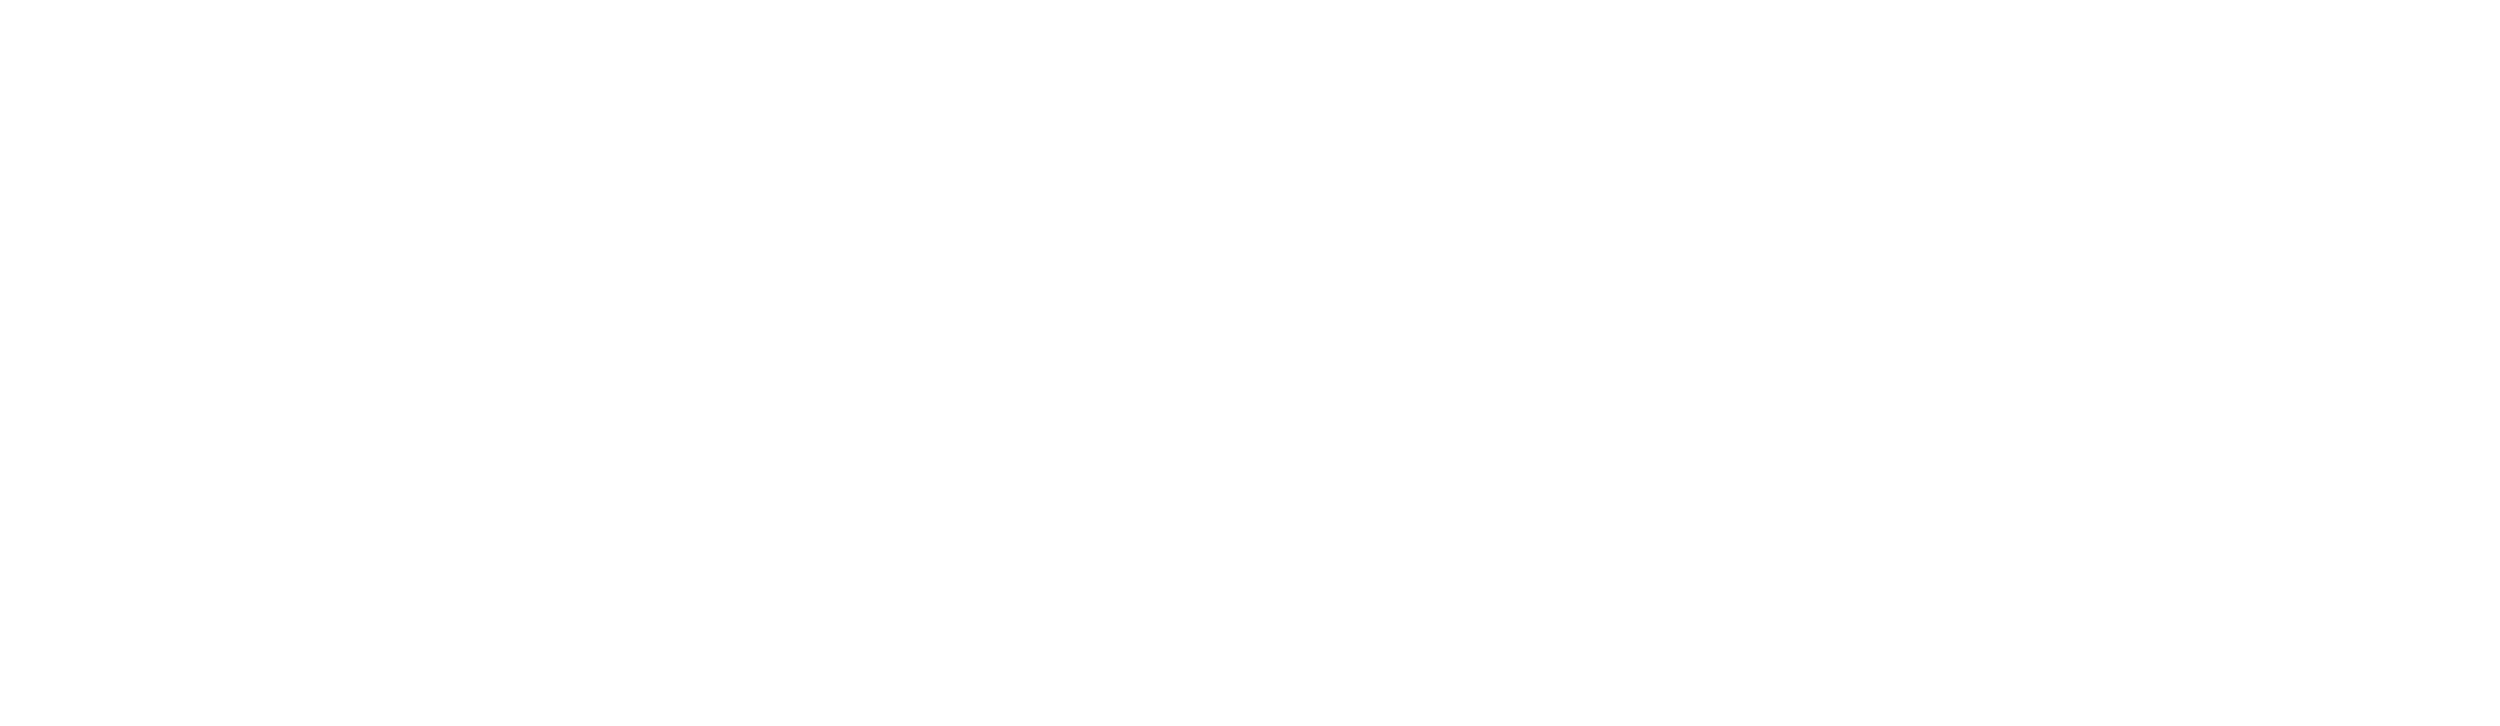 OFFICIALSELECTION-ANNONAY.png